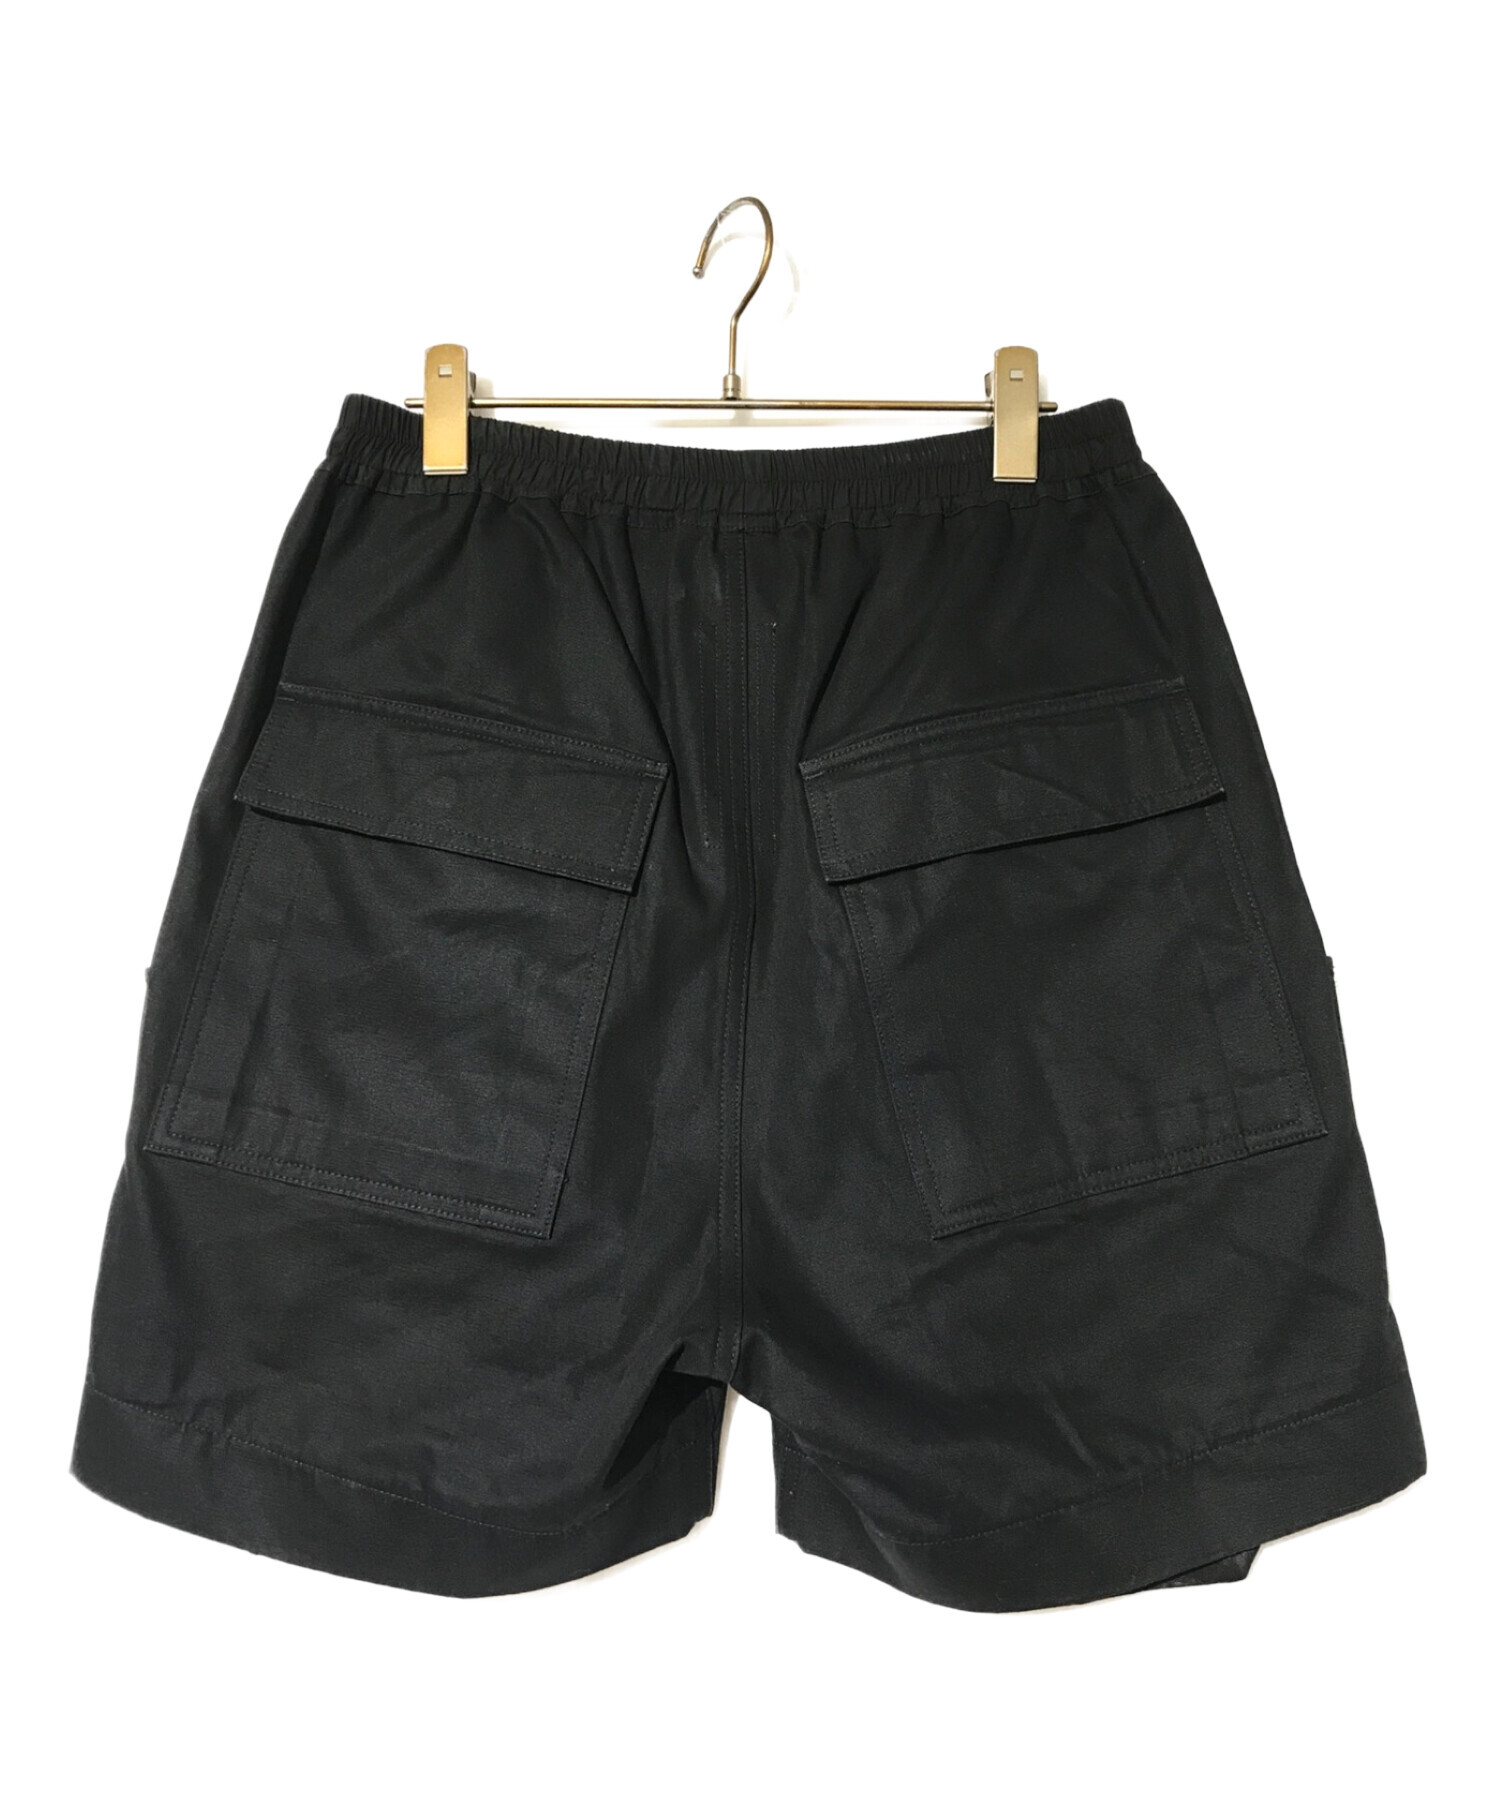 G_ArchiveS_一覧Rick Owens 16SS CYCLOPS CARGO BOXERS 46